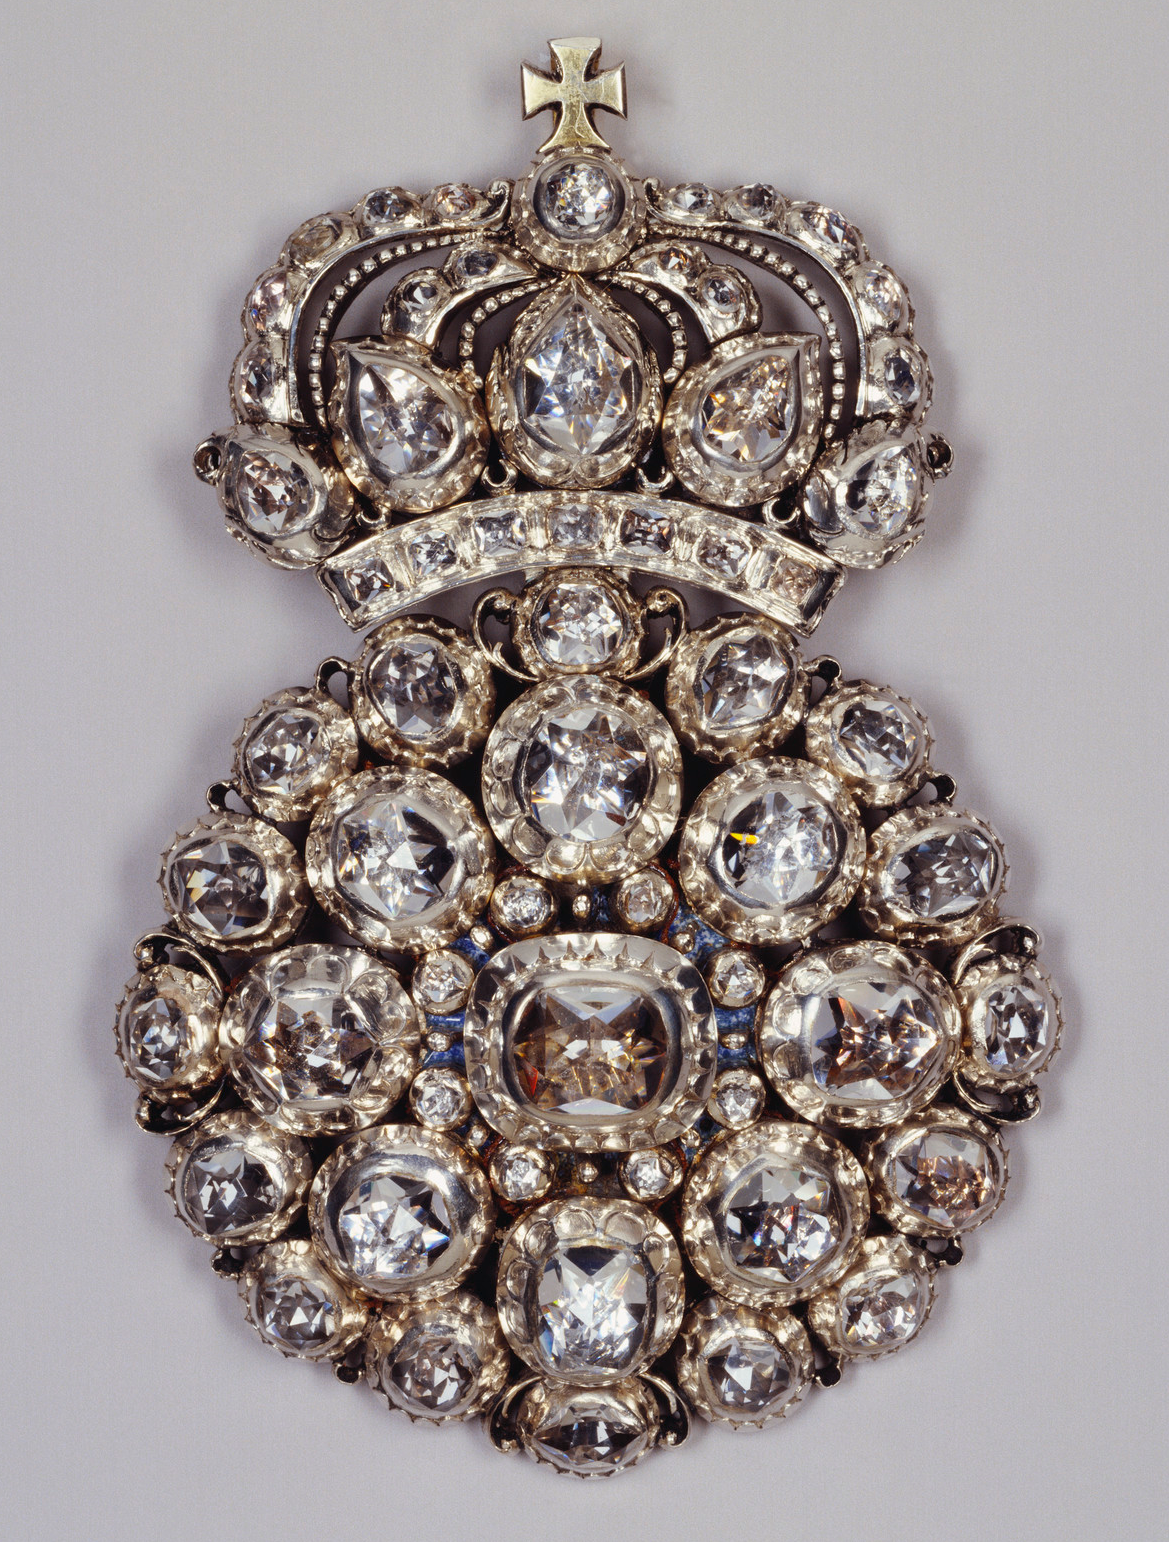 Rose-cut rock crystal badge, c. 1690 from the Royal Collection Trust.